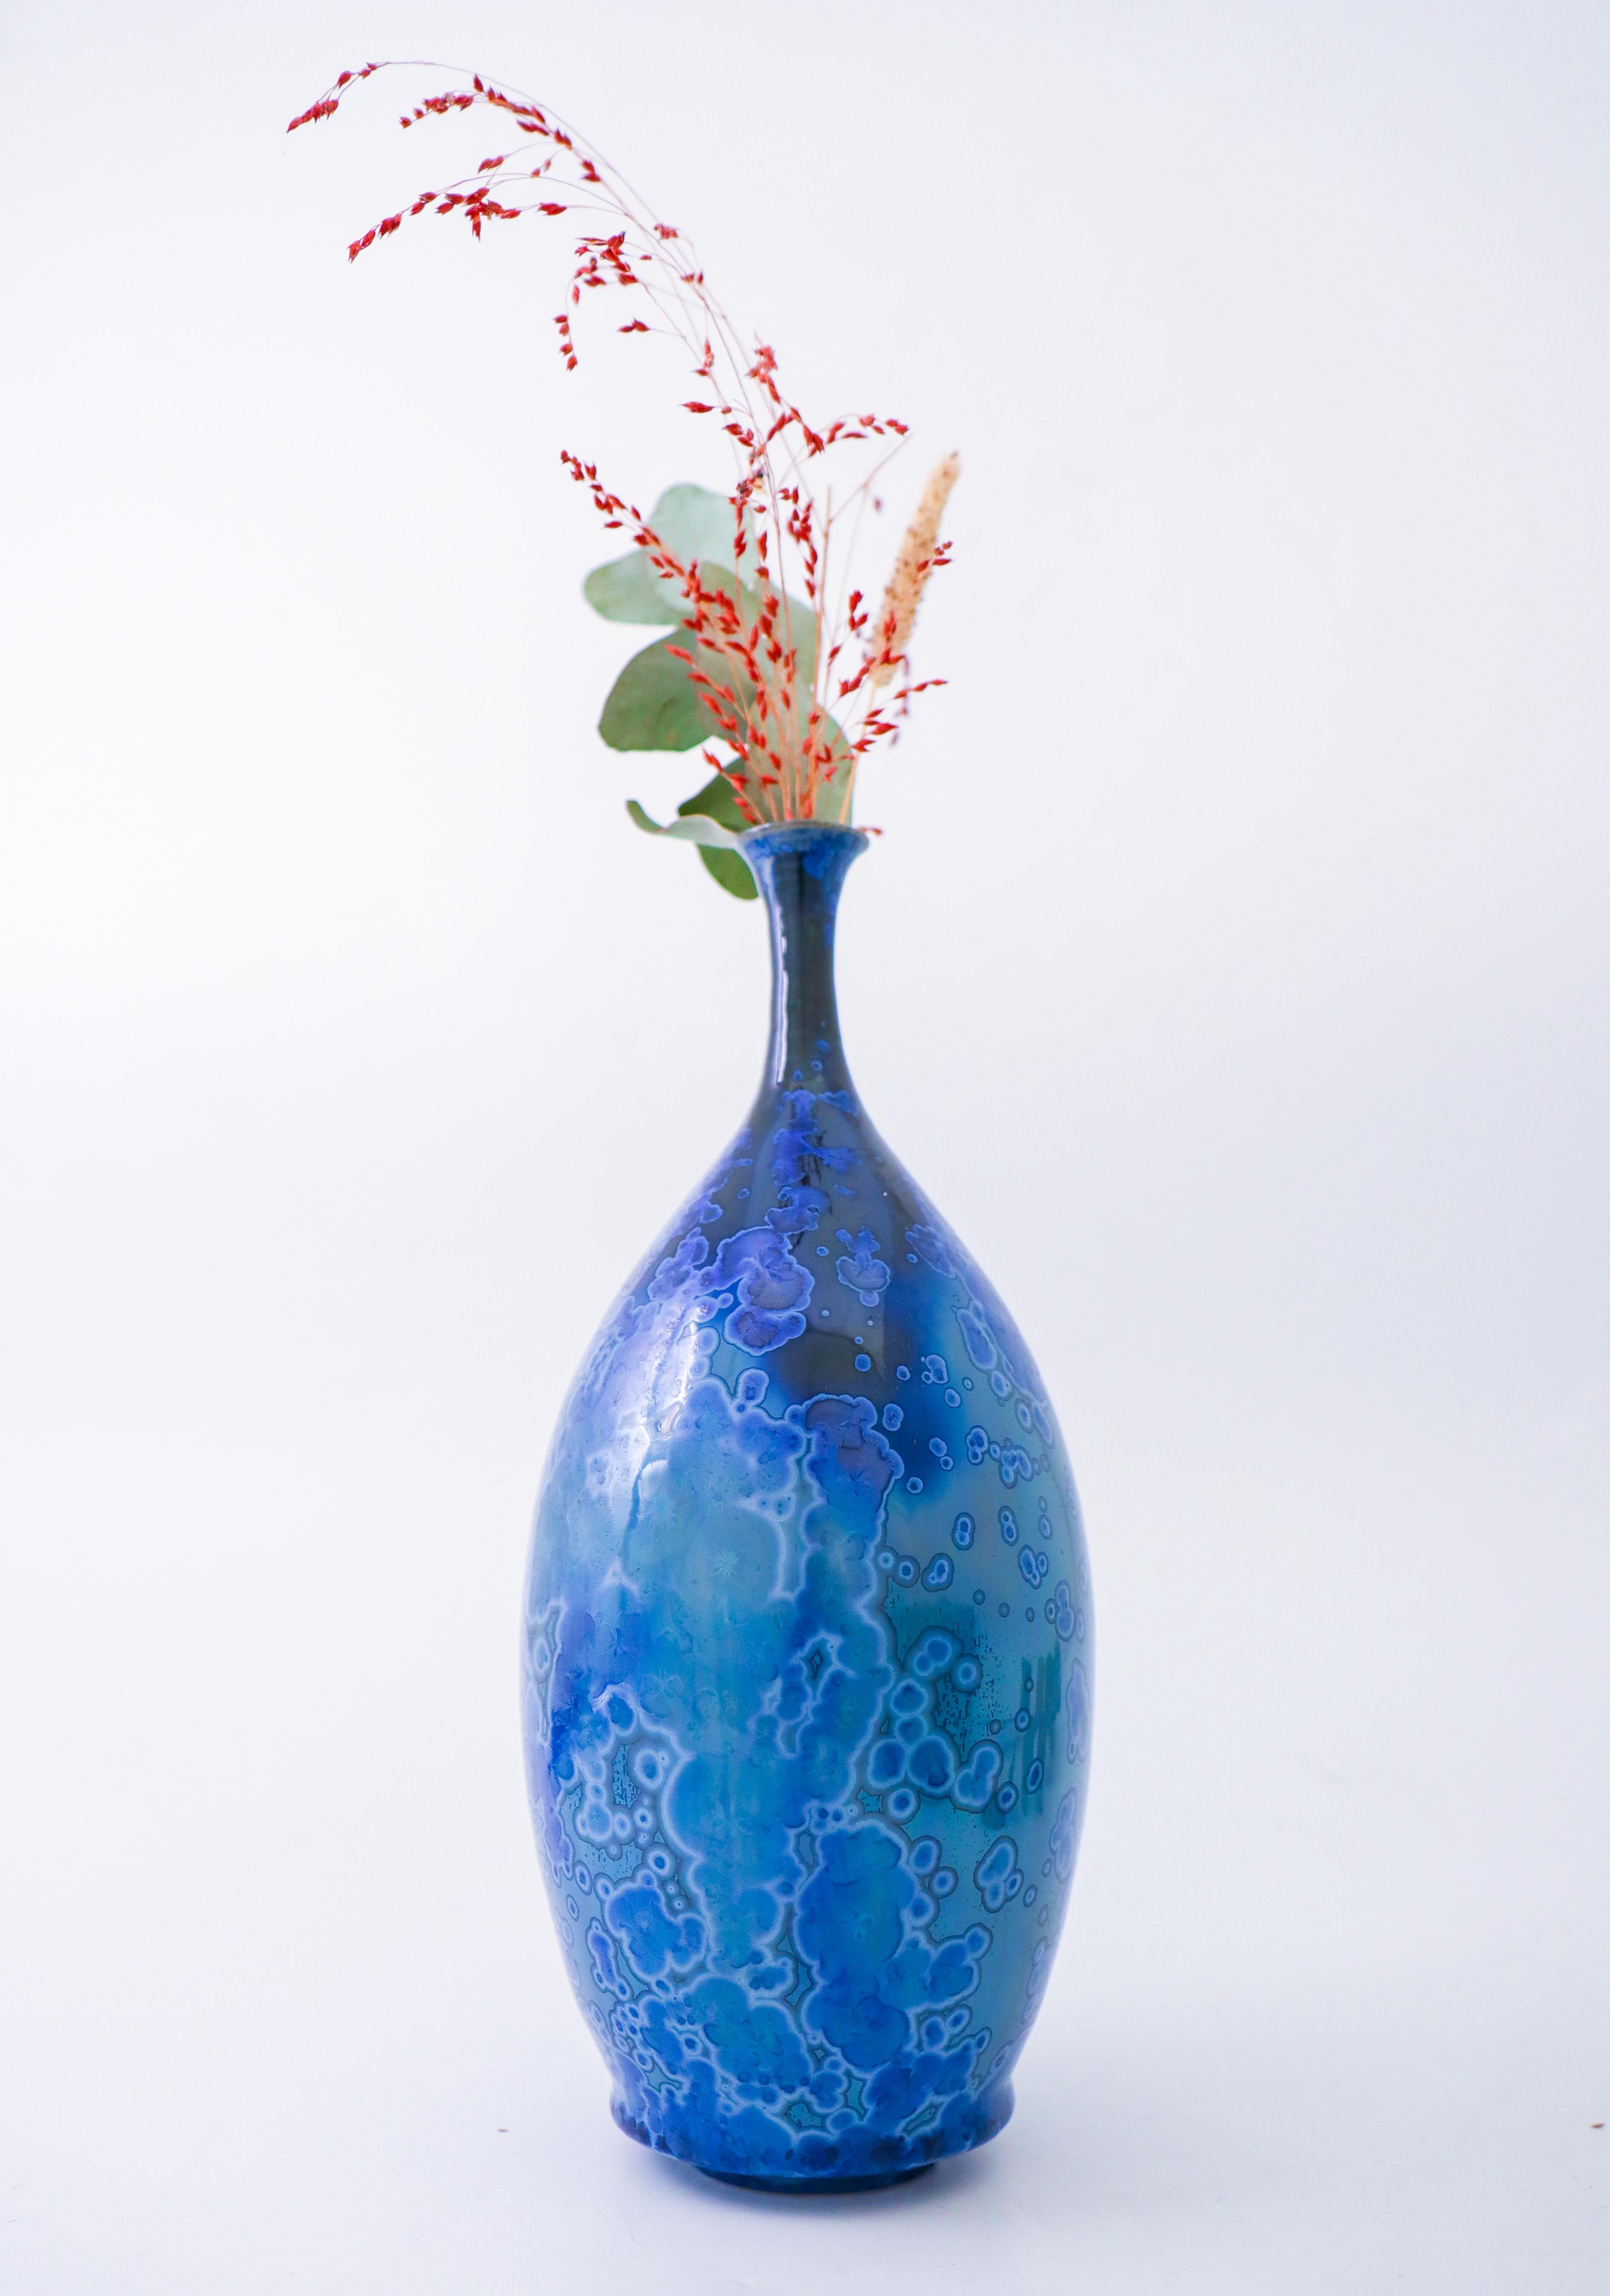 A blue vase with a lovely crystalline glaze designed by Isak Isaksson in Sweden. The vase is 25 cm (10